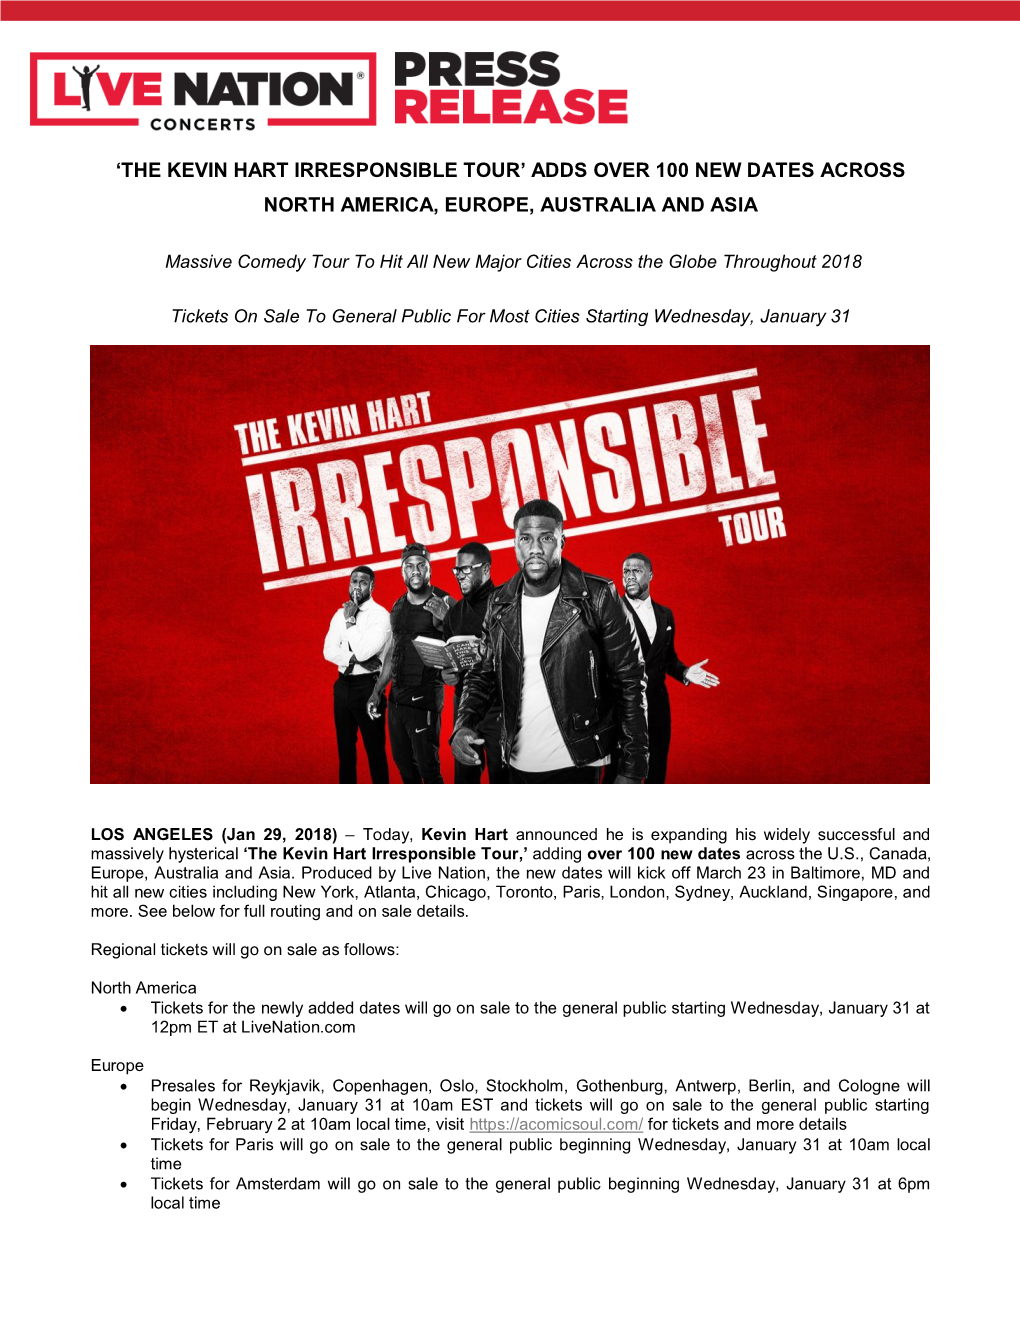 'The Kevin Hart Irresponsible Tour' Adds Over 100 New